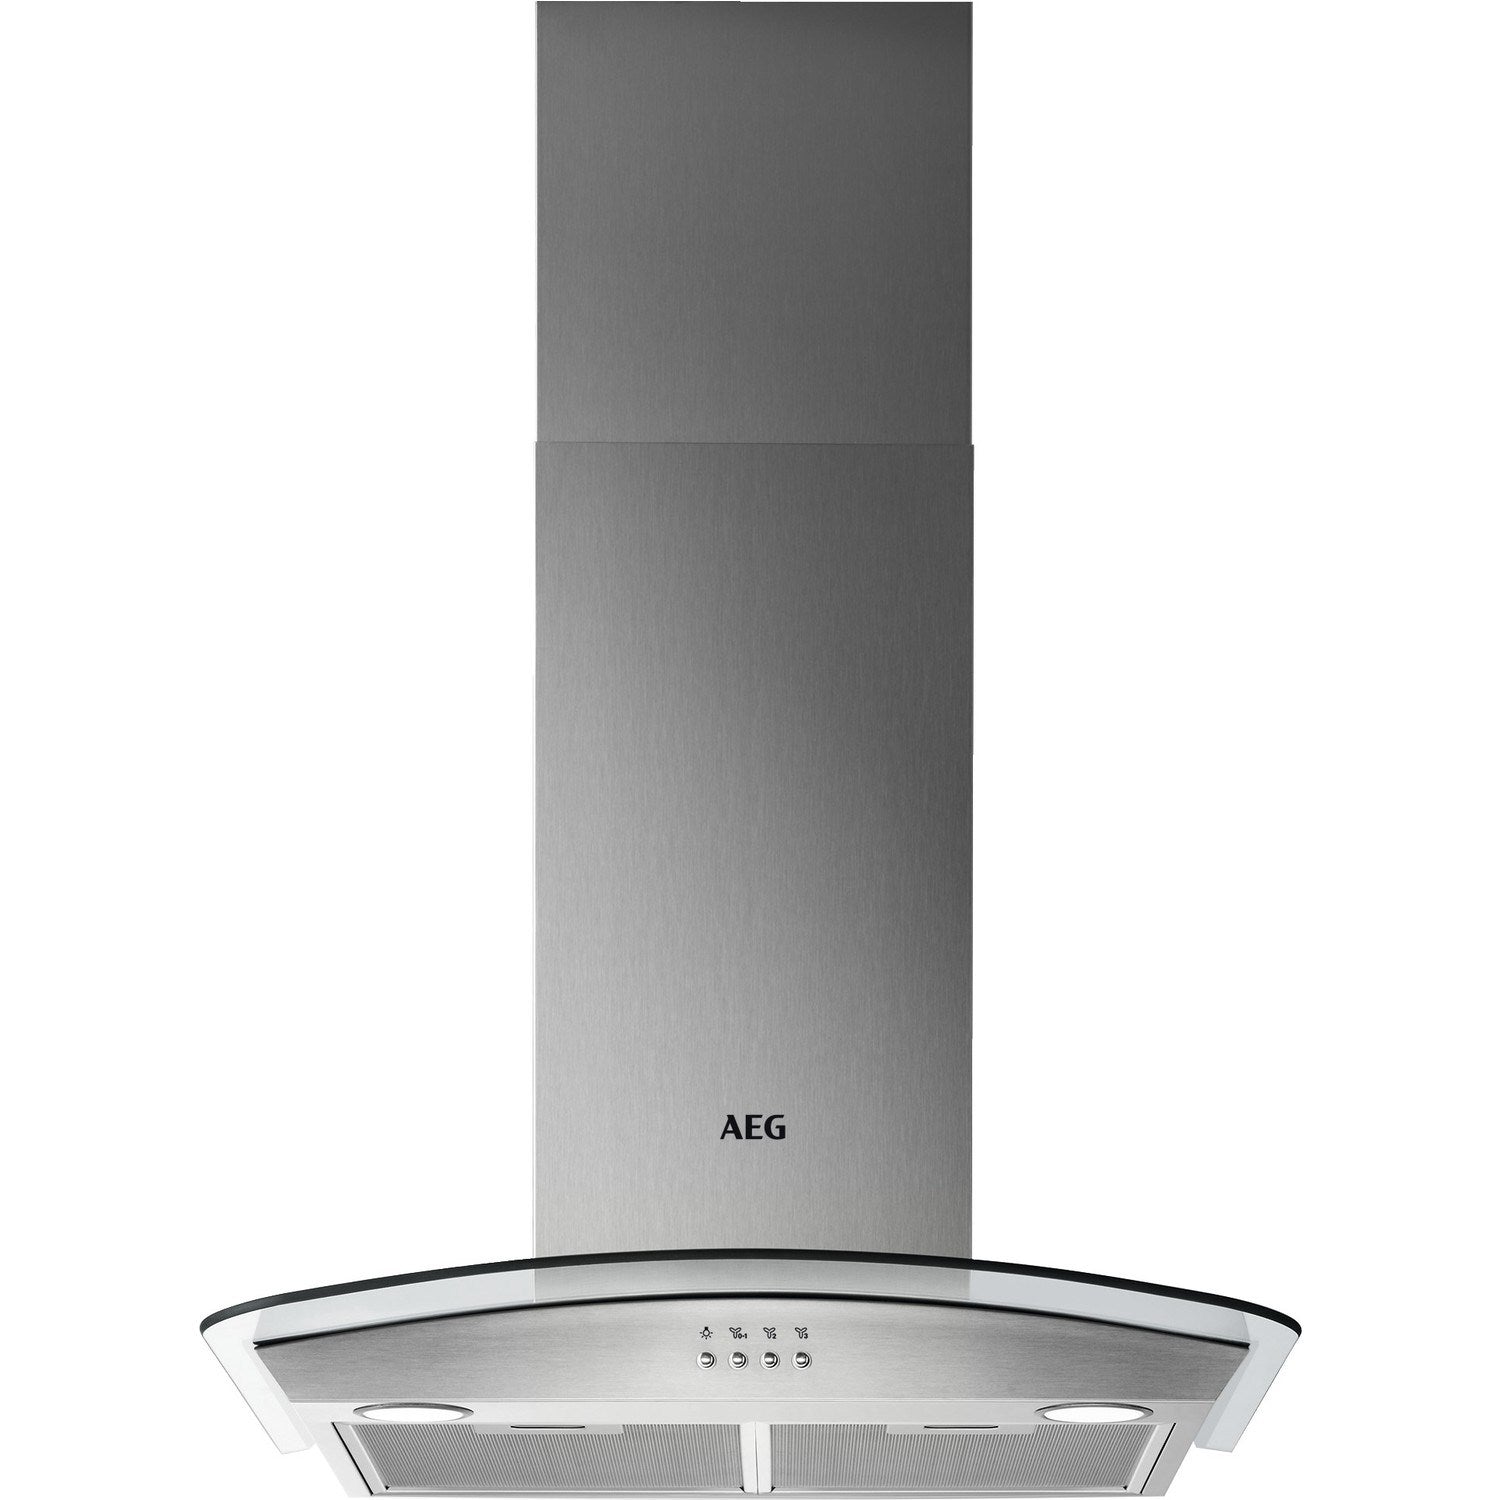 AEG DTB3653M Chimney Hood 60cm Curved Glass in Stainless Steel